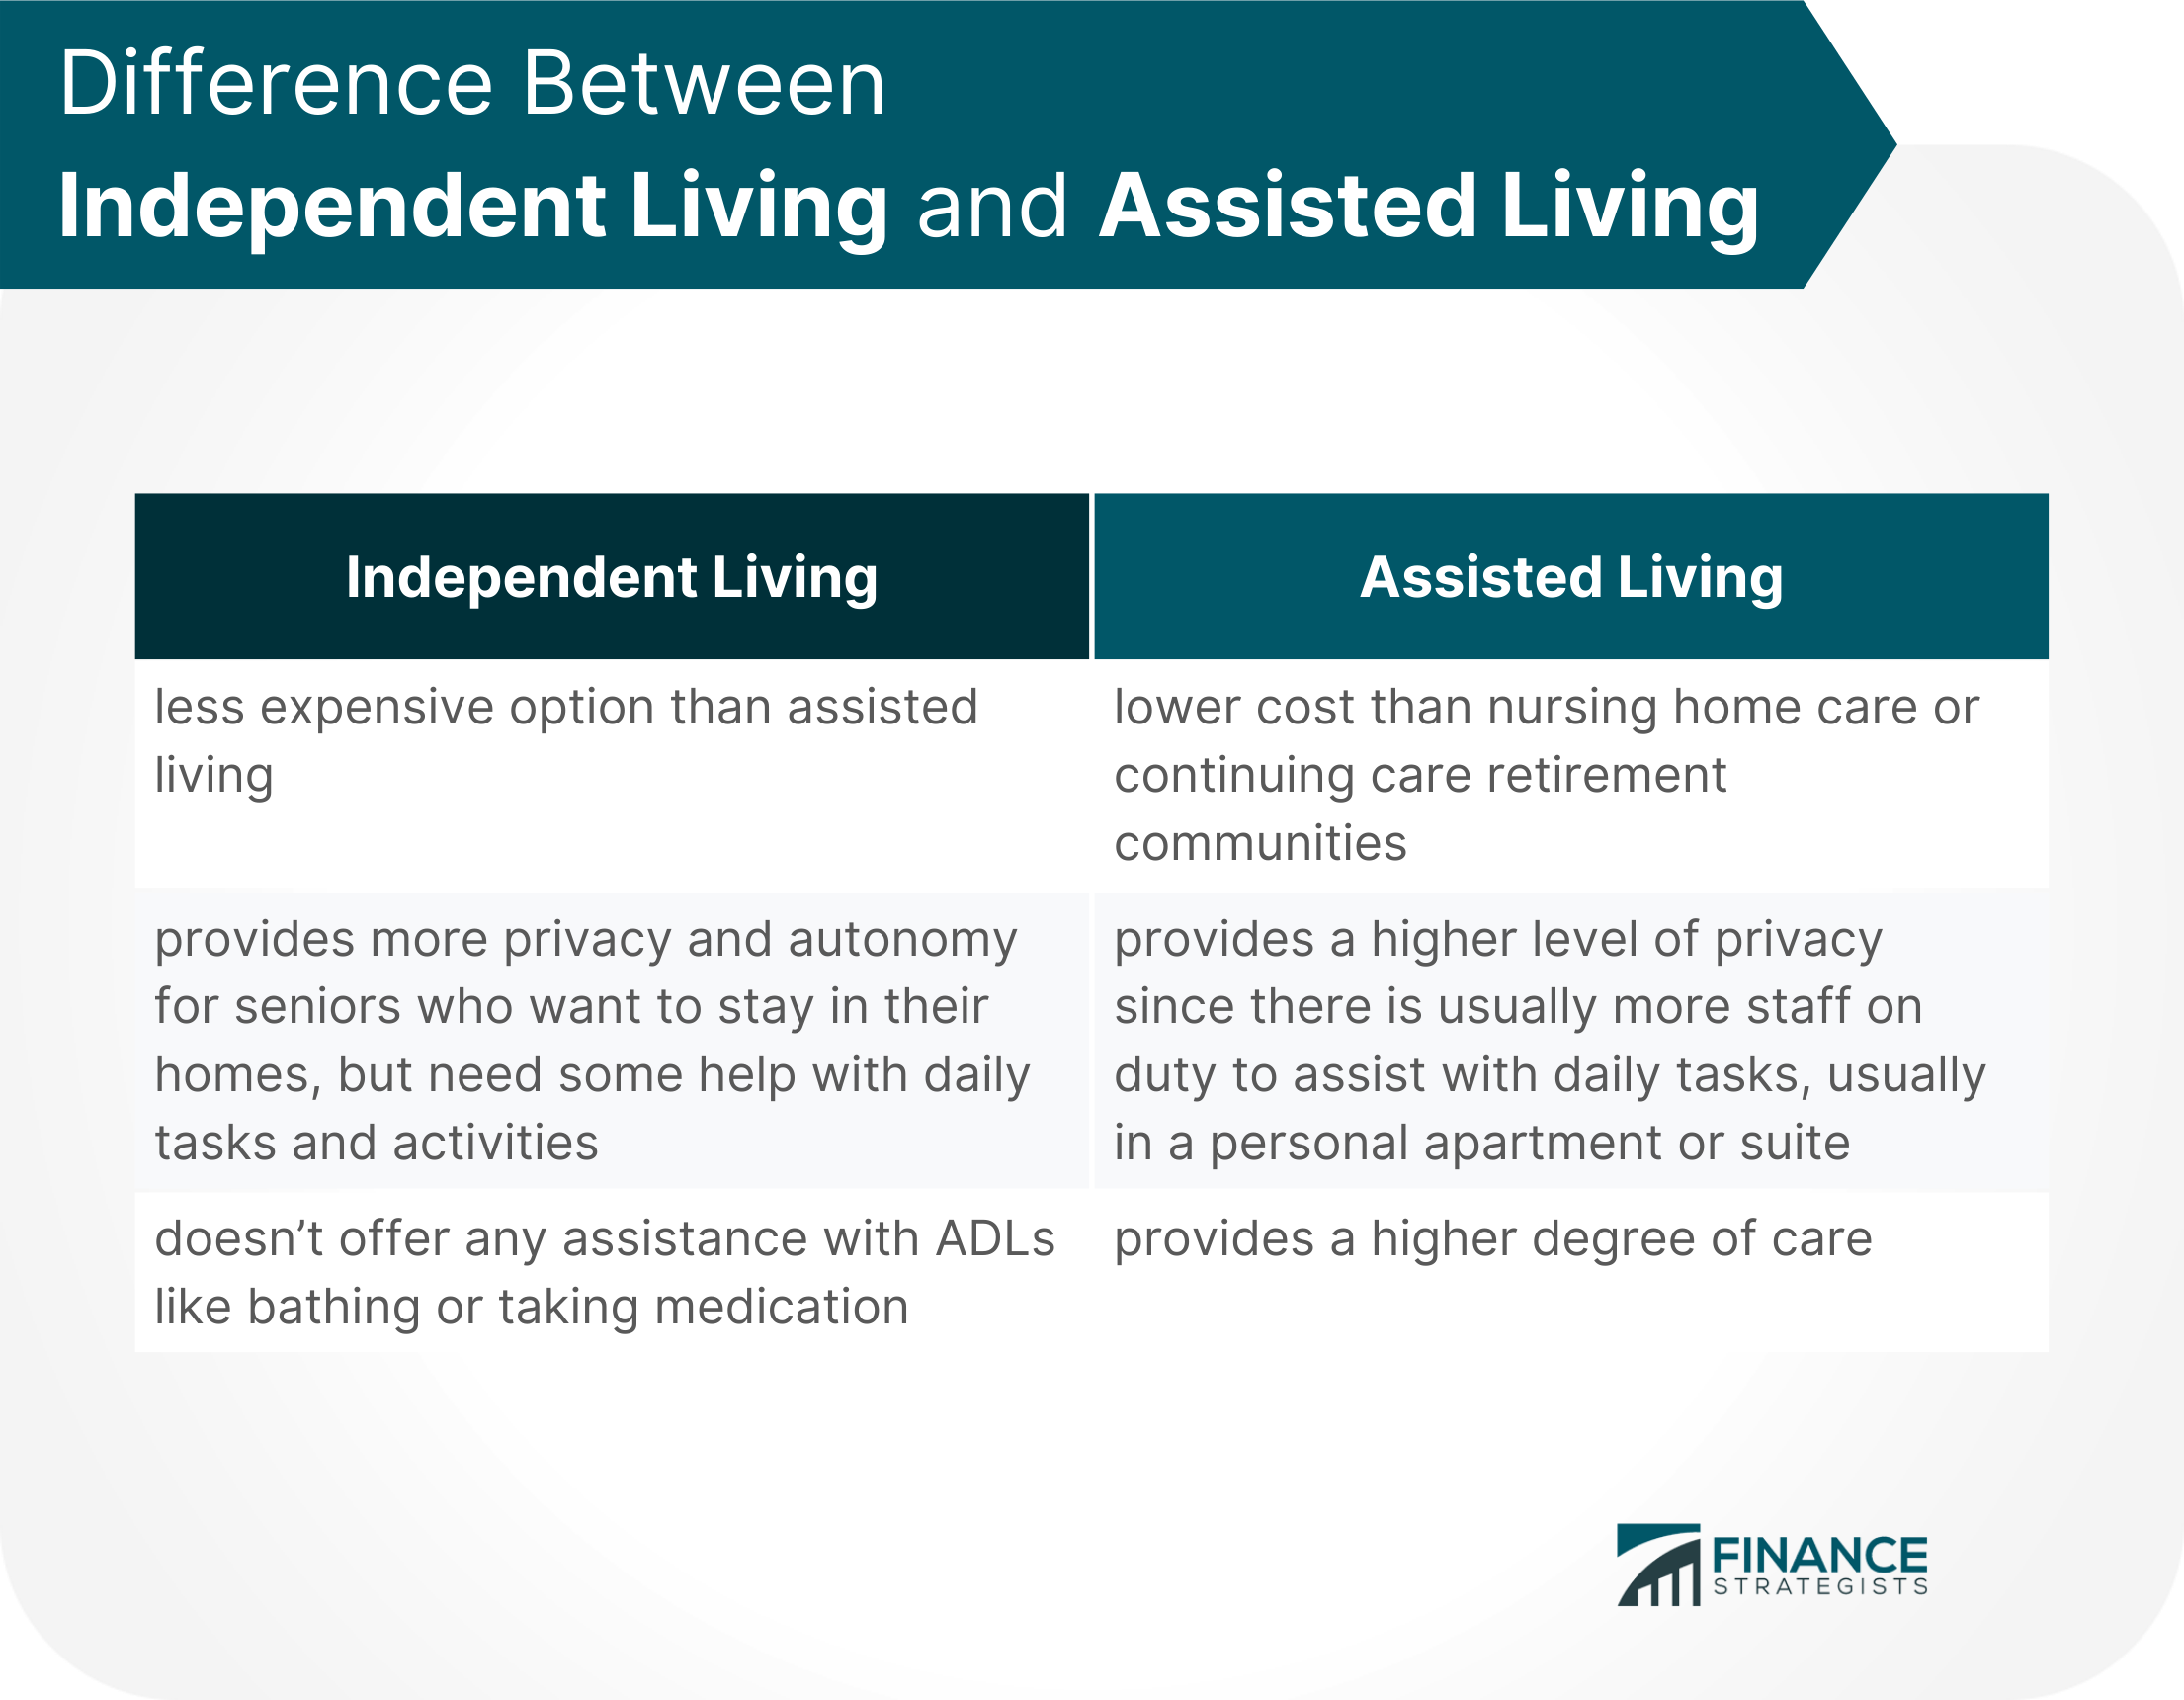 Difference Between Independent Living and Assisted Living